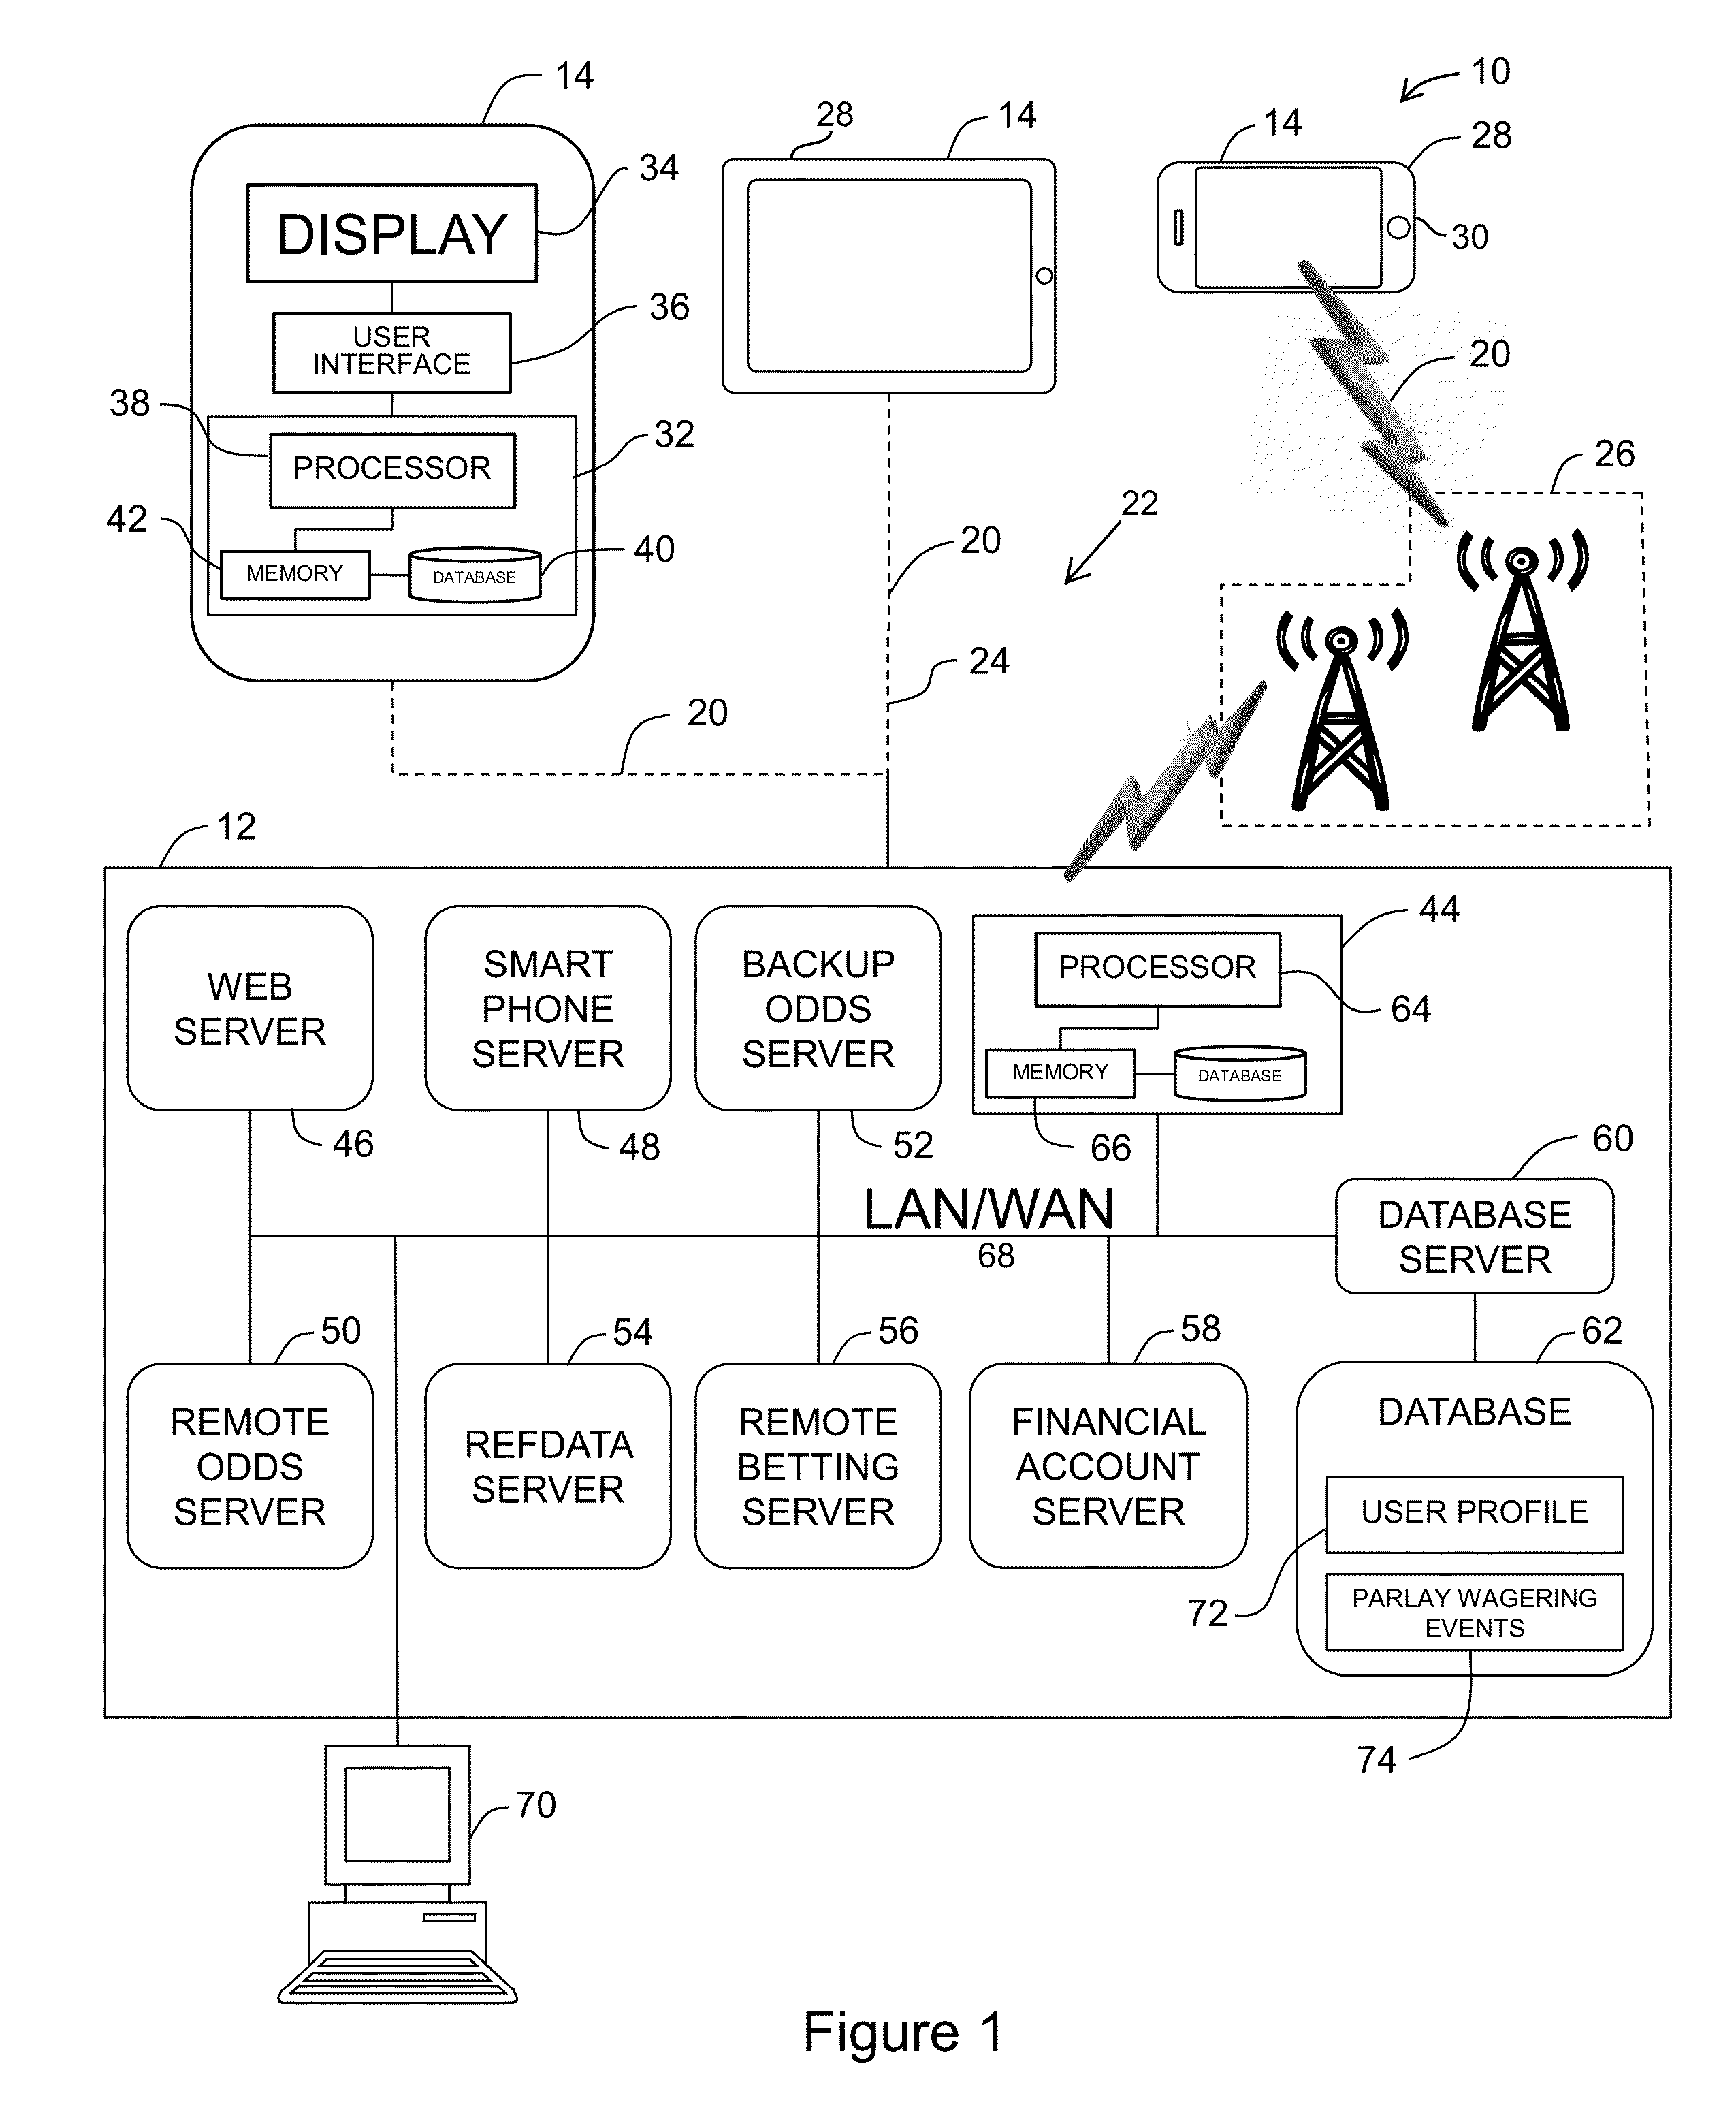 System and method for allowing users to place parlay wagers via mobile computing devices